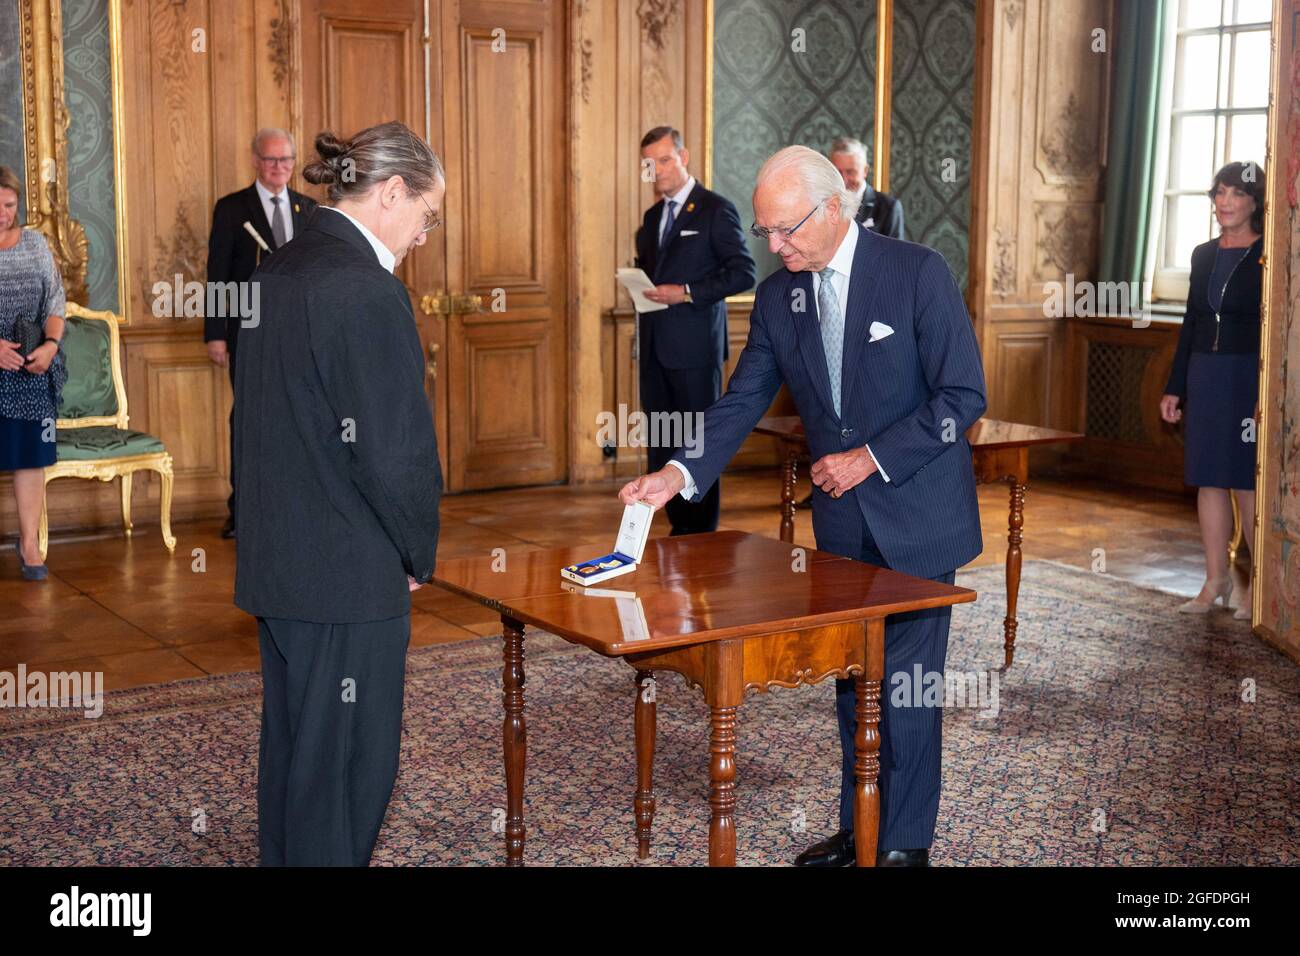 King Carl XVI Gustaf and Queen Silvia present the Prince Eugen Medal for 2020 at the Royal Palace of Stockholm, Sweden on August 25, 2021. Photo by Fredrik Wennerlund/Stella Pictures/ABACAPRESS.COM Stock Photo